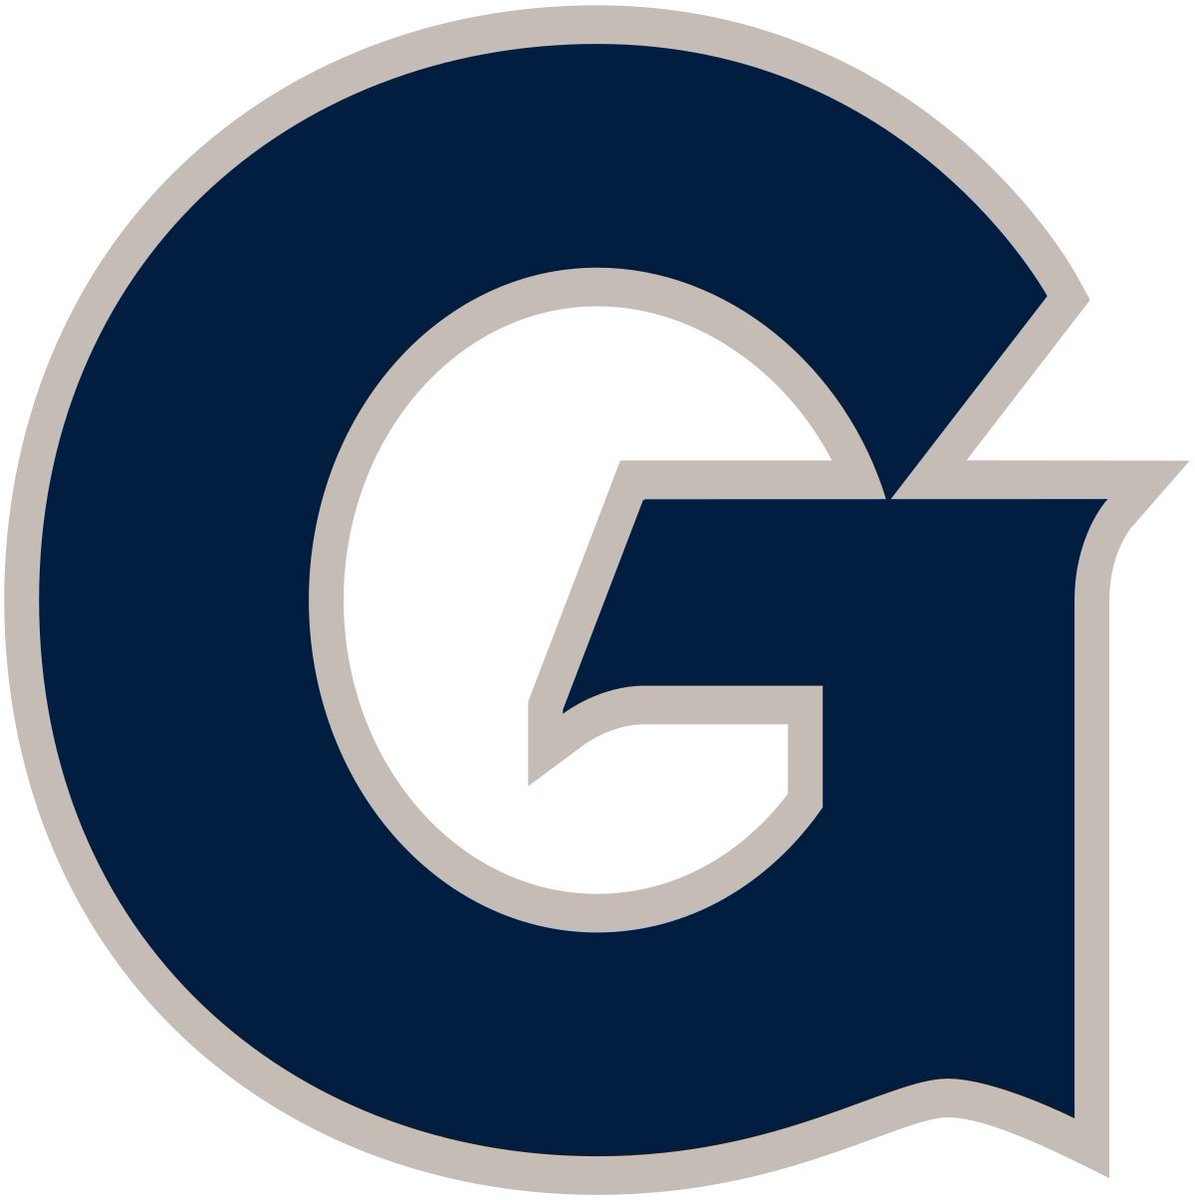 After talking with @CoachDHaney I am blessed to have received an offer from the University of Georgetown! @GeorgetownWBB #GoHoya